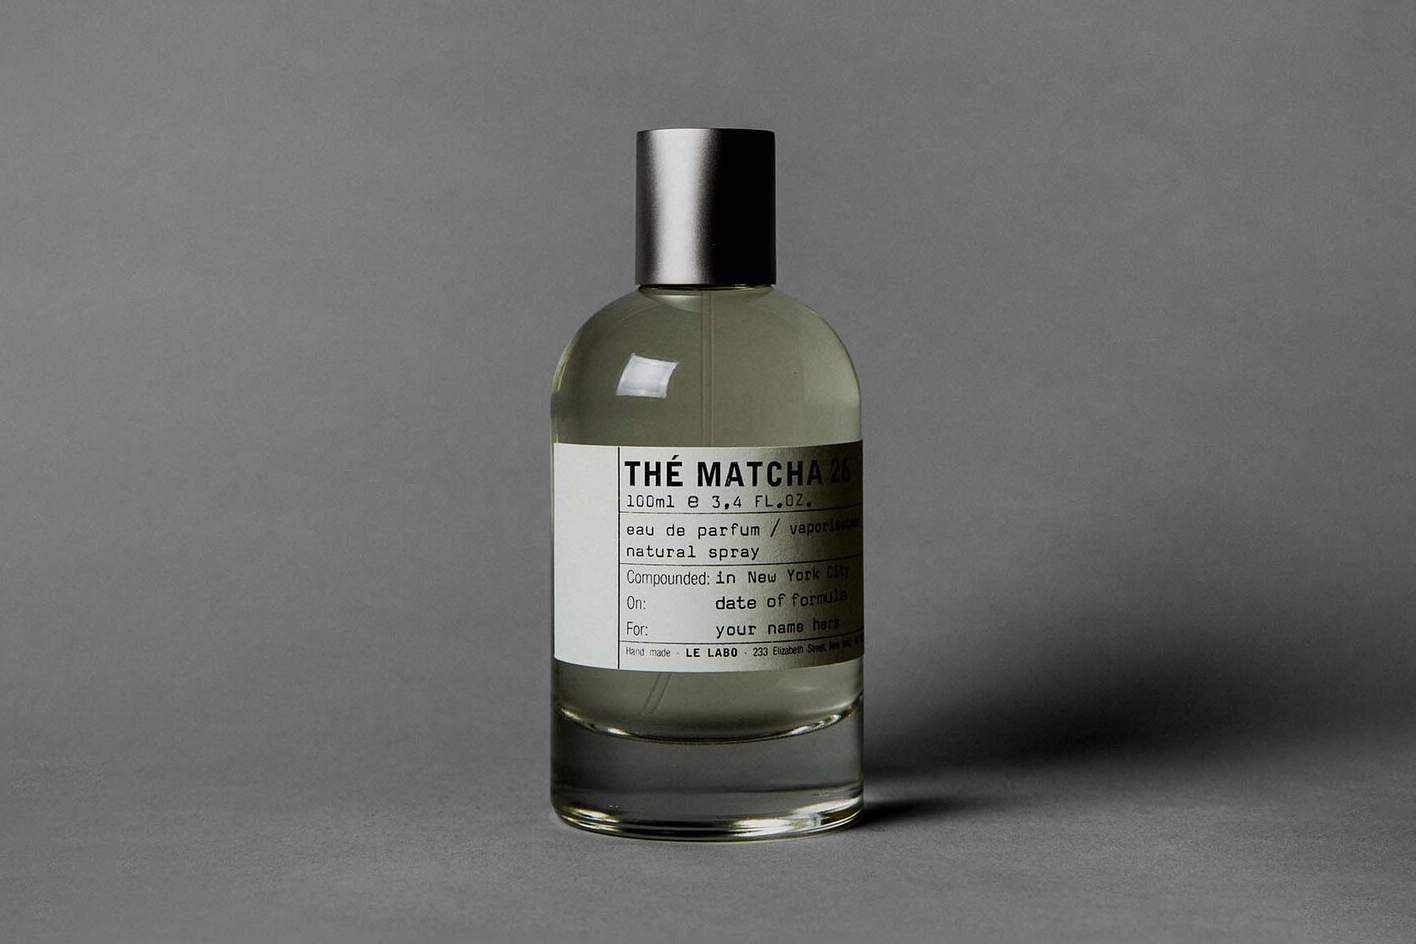 Le Labo THÉ MATCHA 26 | Softer Volumes Christmas Gift Guide